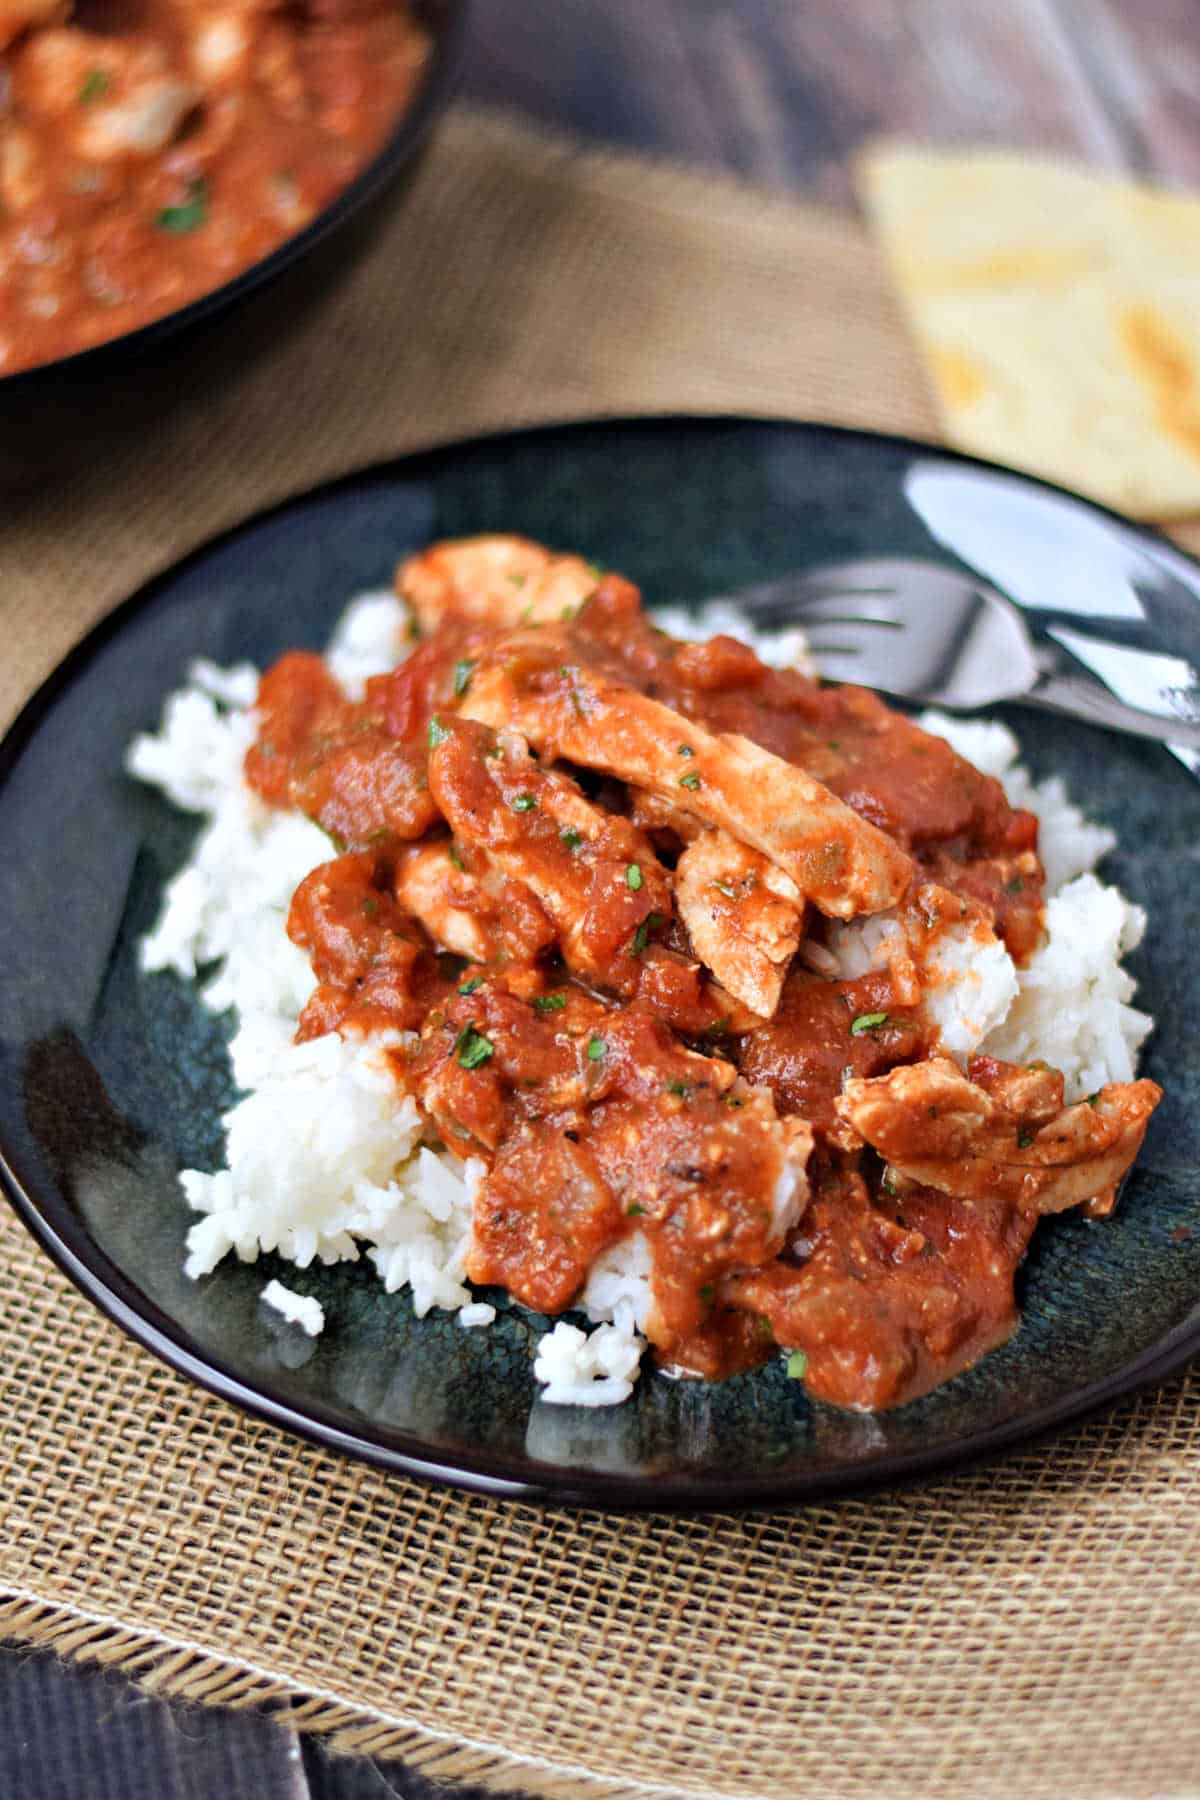 Pieces of chicken in masala sauce over rice.